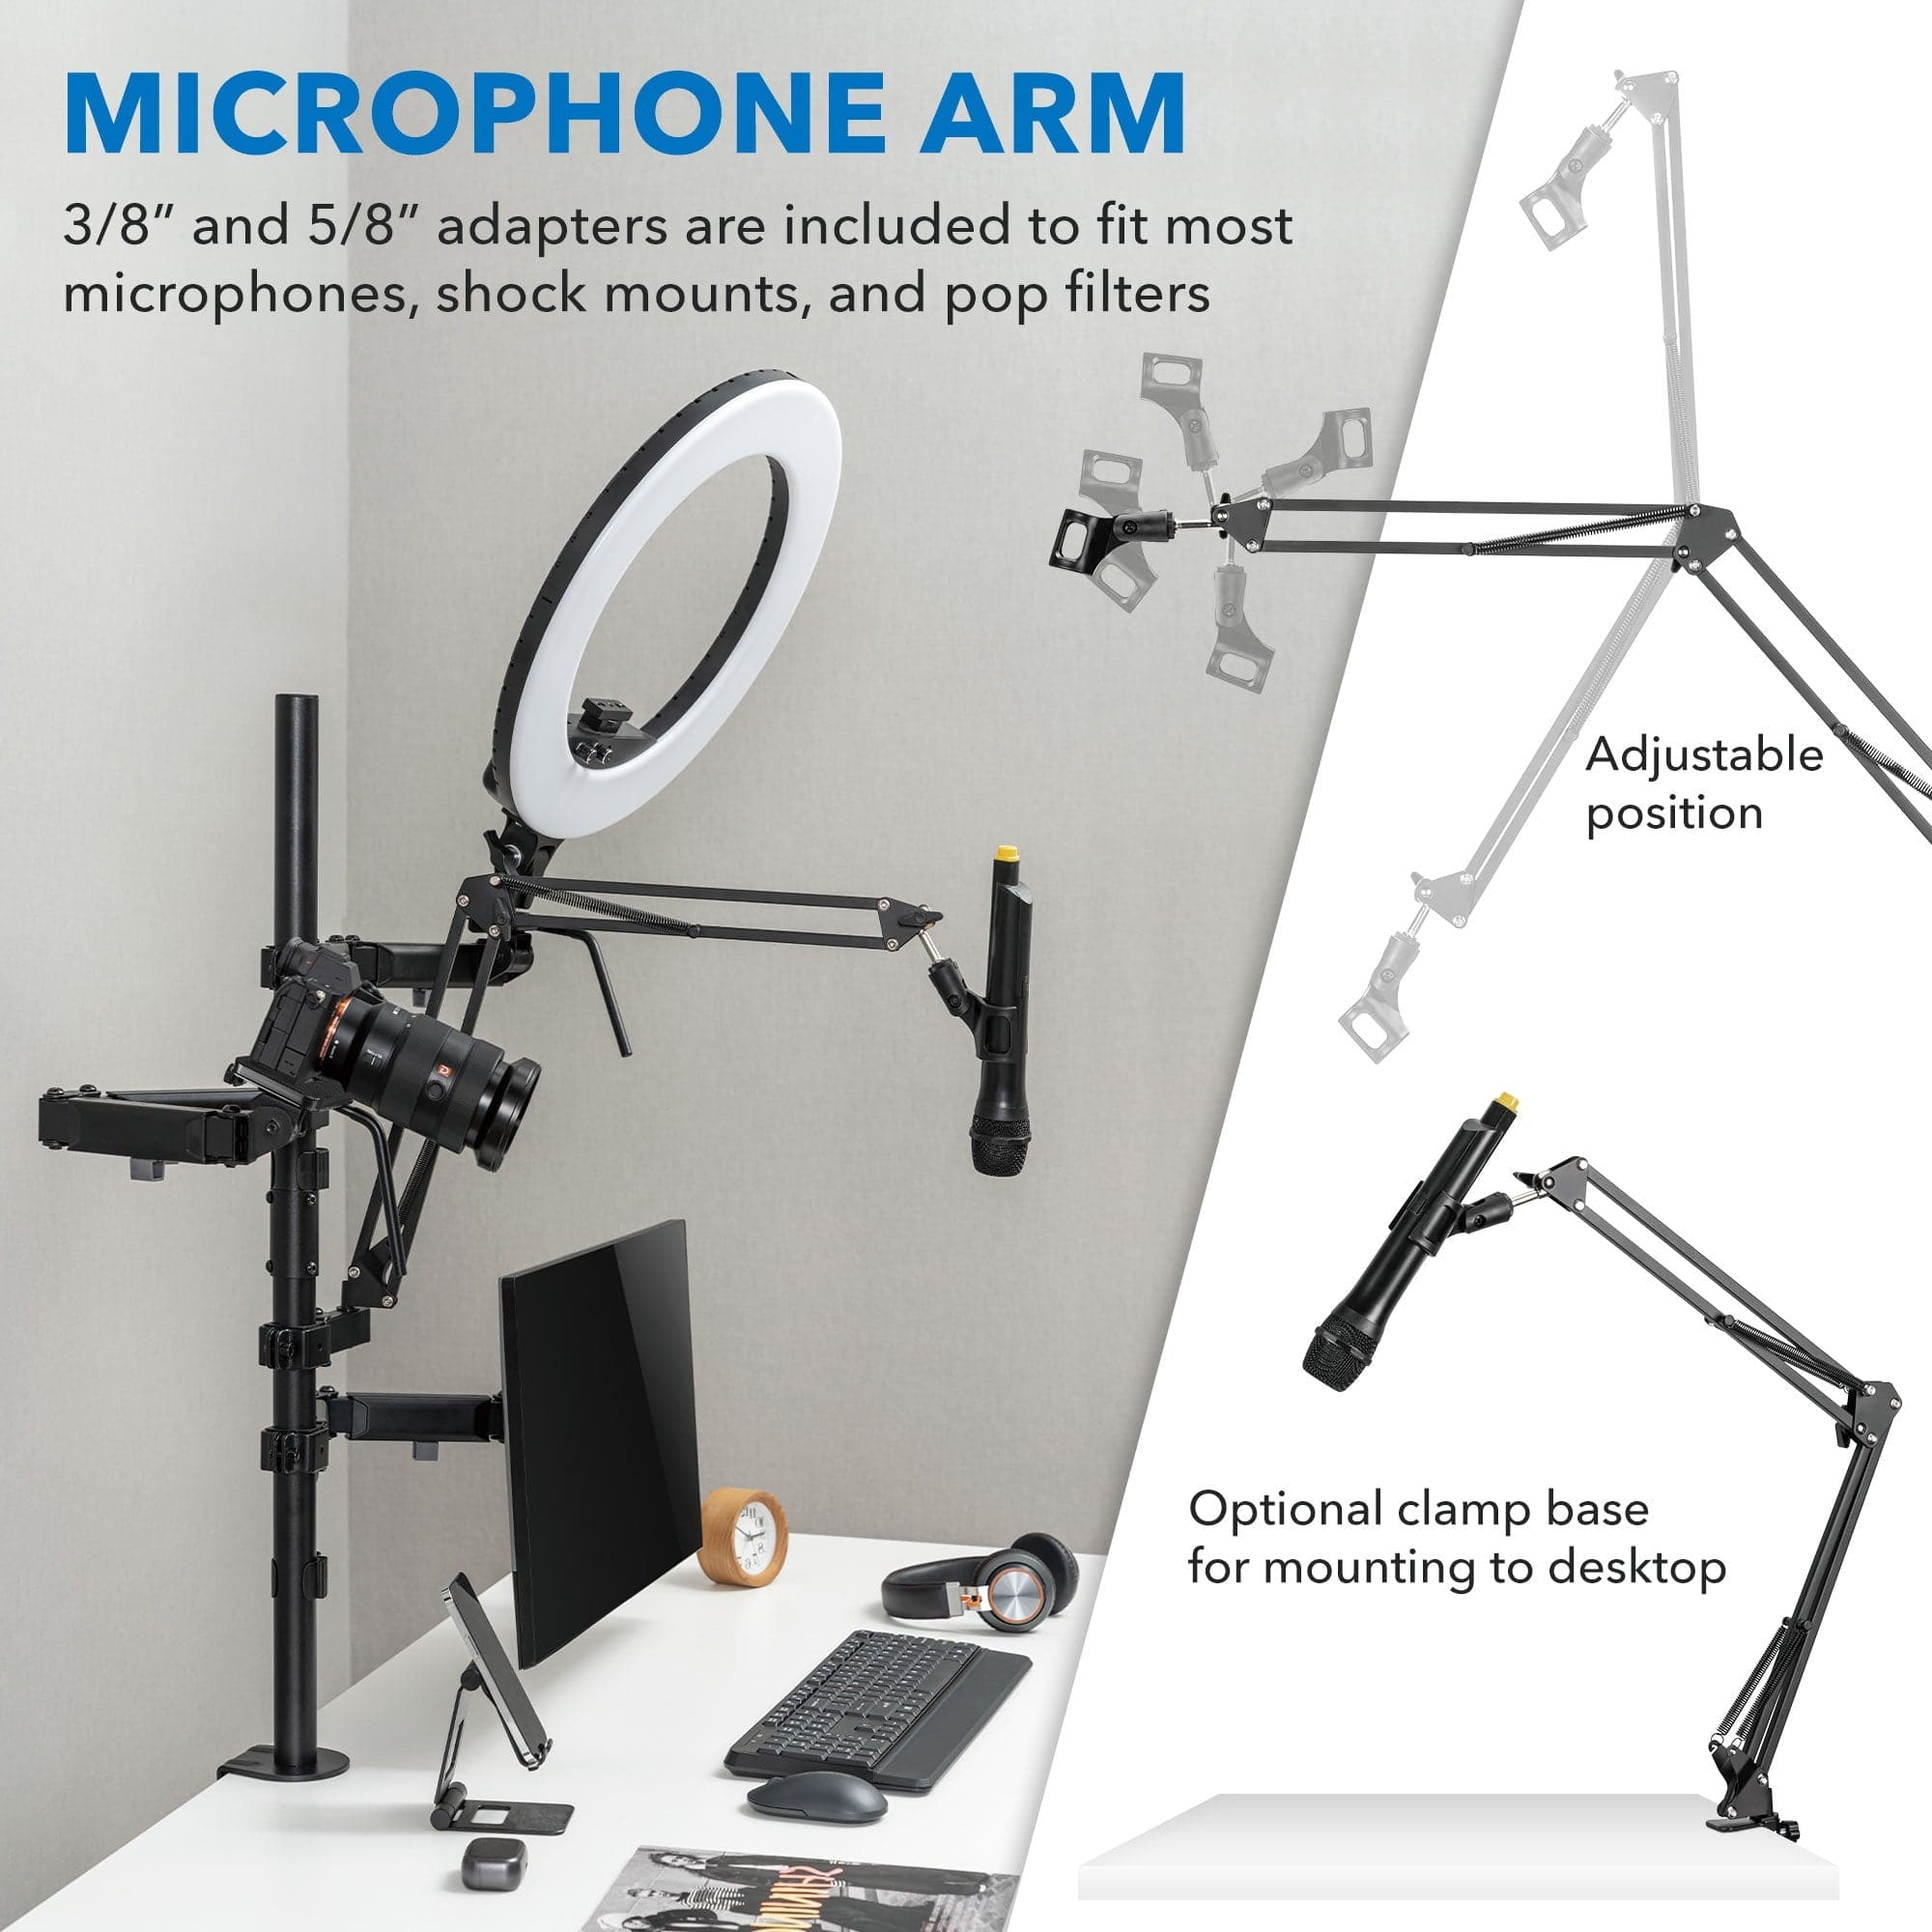 All-In-One Studio Mount for Single Monitor, Camera, Light and Mic - Mount-It!